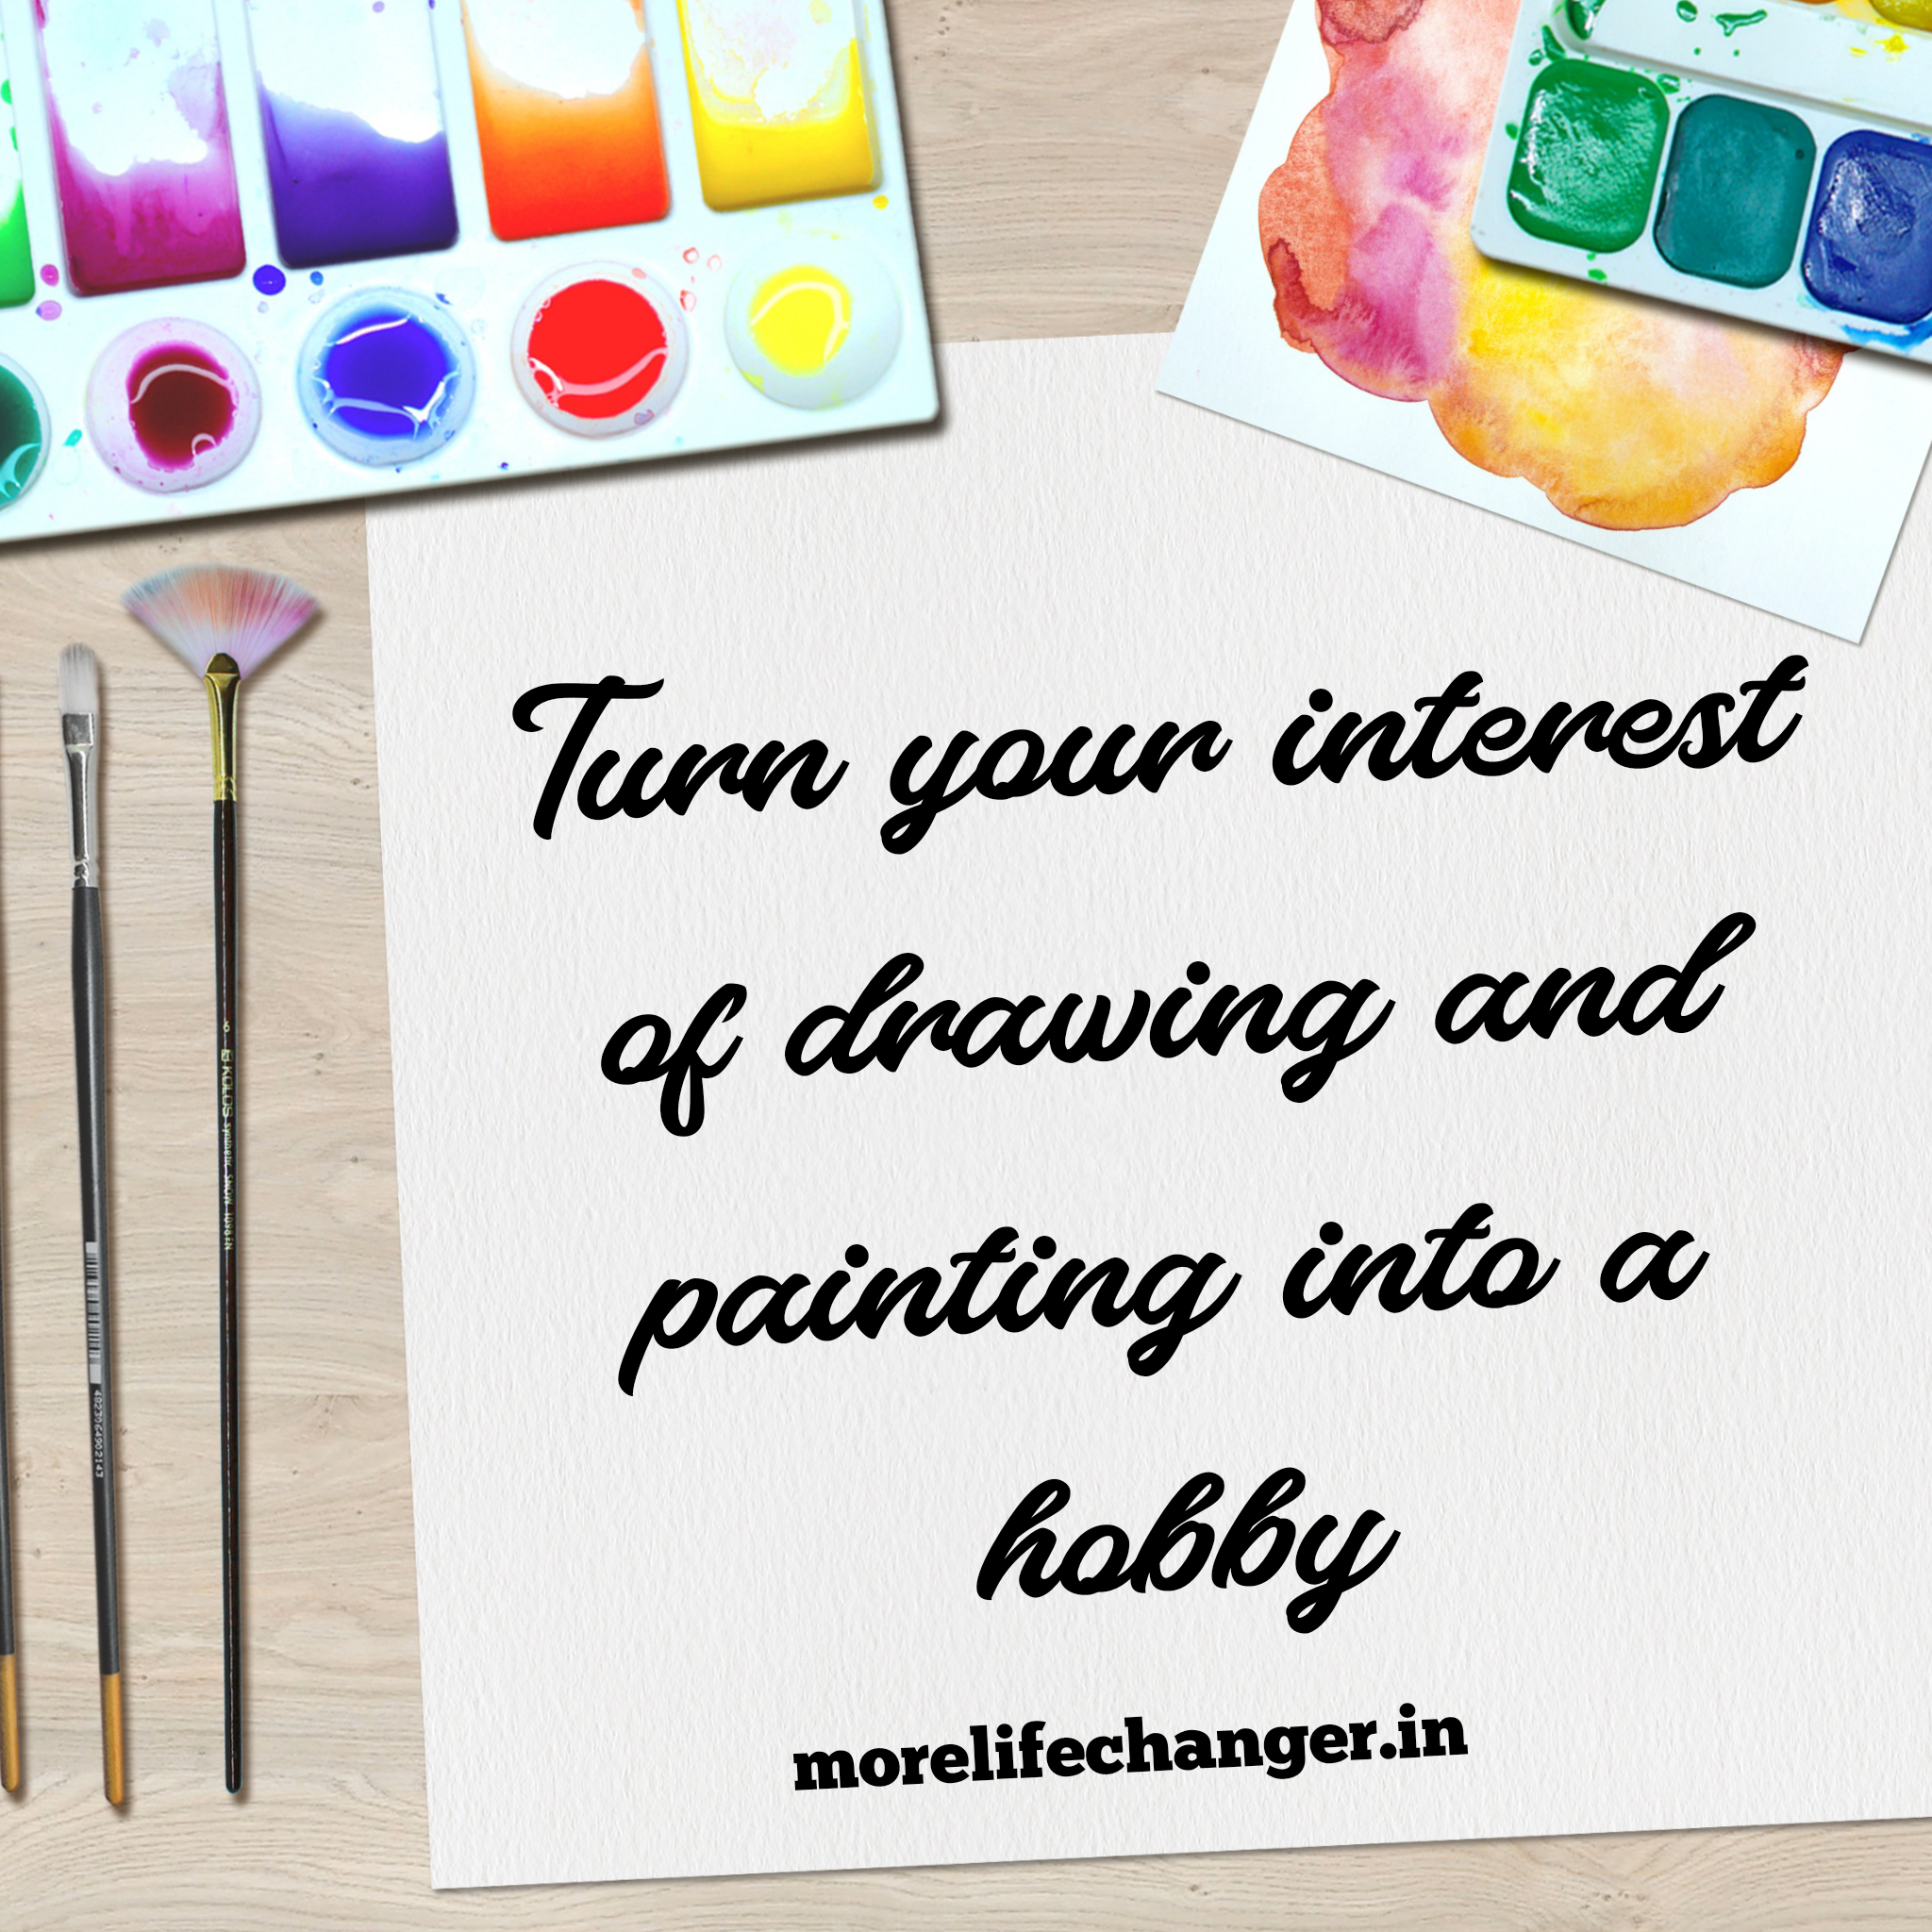 Turn your interest of drawing and painting into a hobby